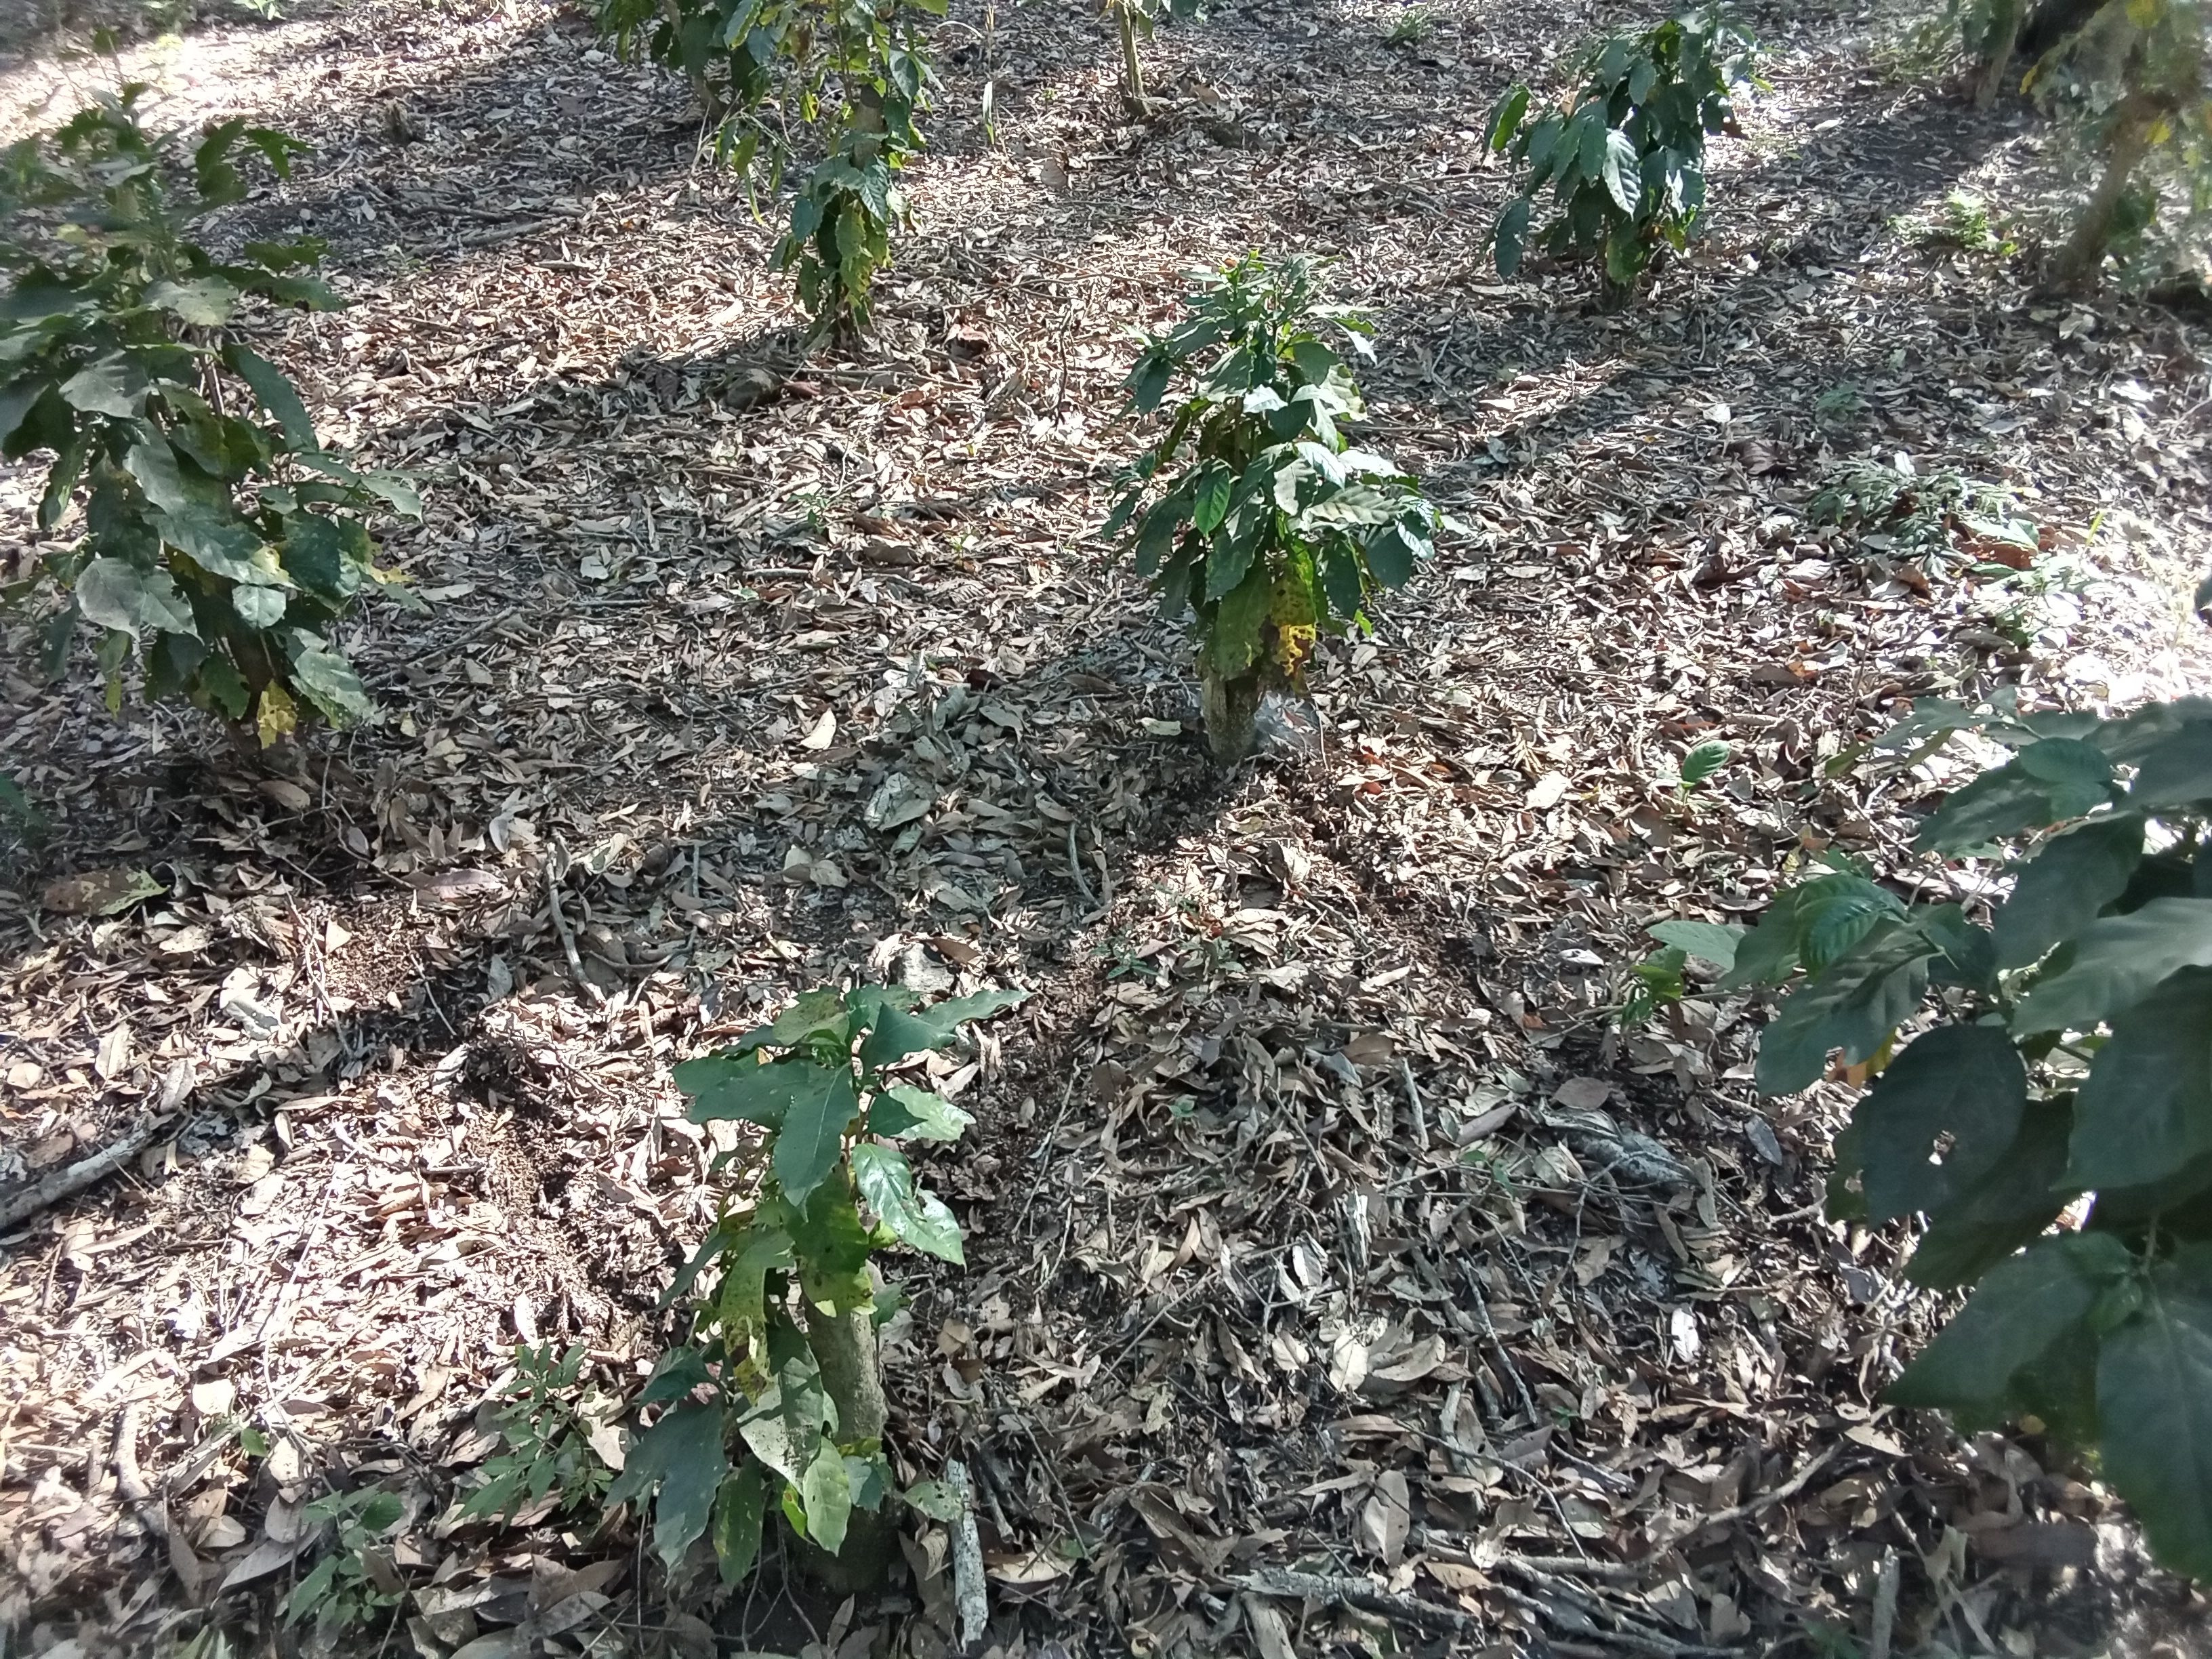 How many coffee trees are planted in an acre?